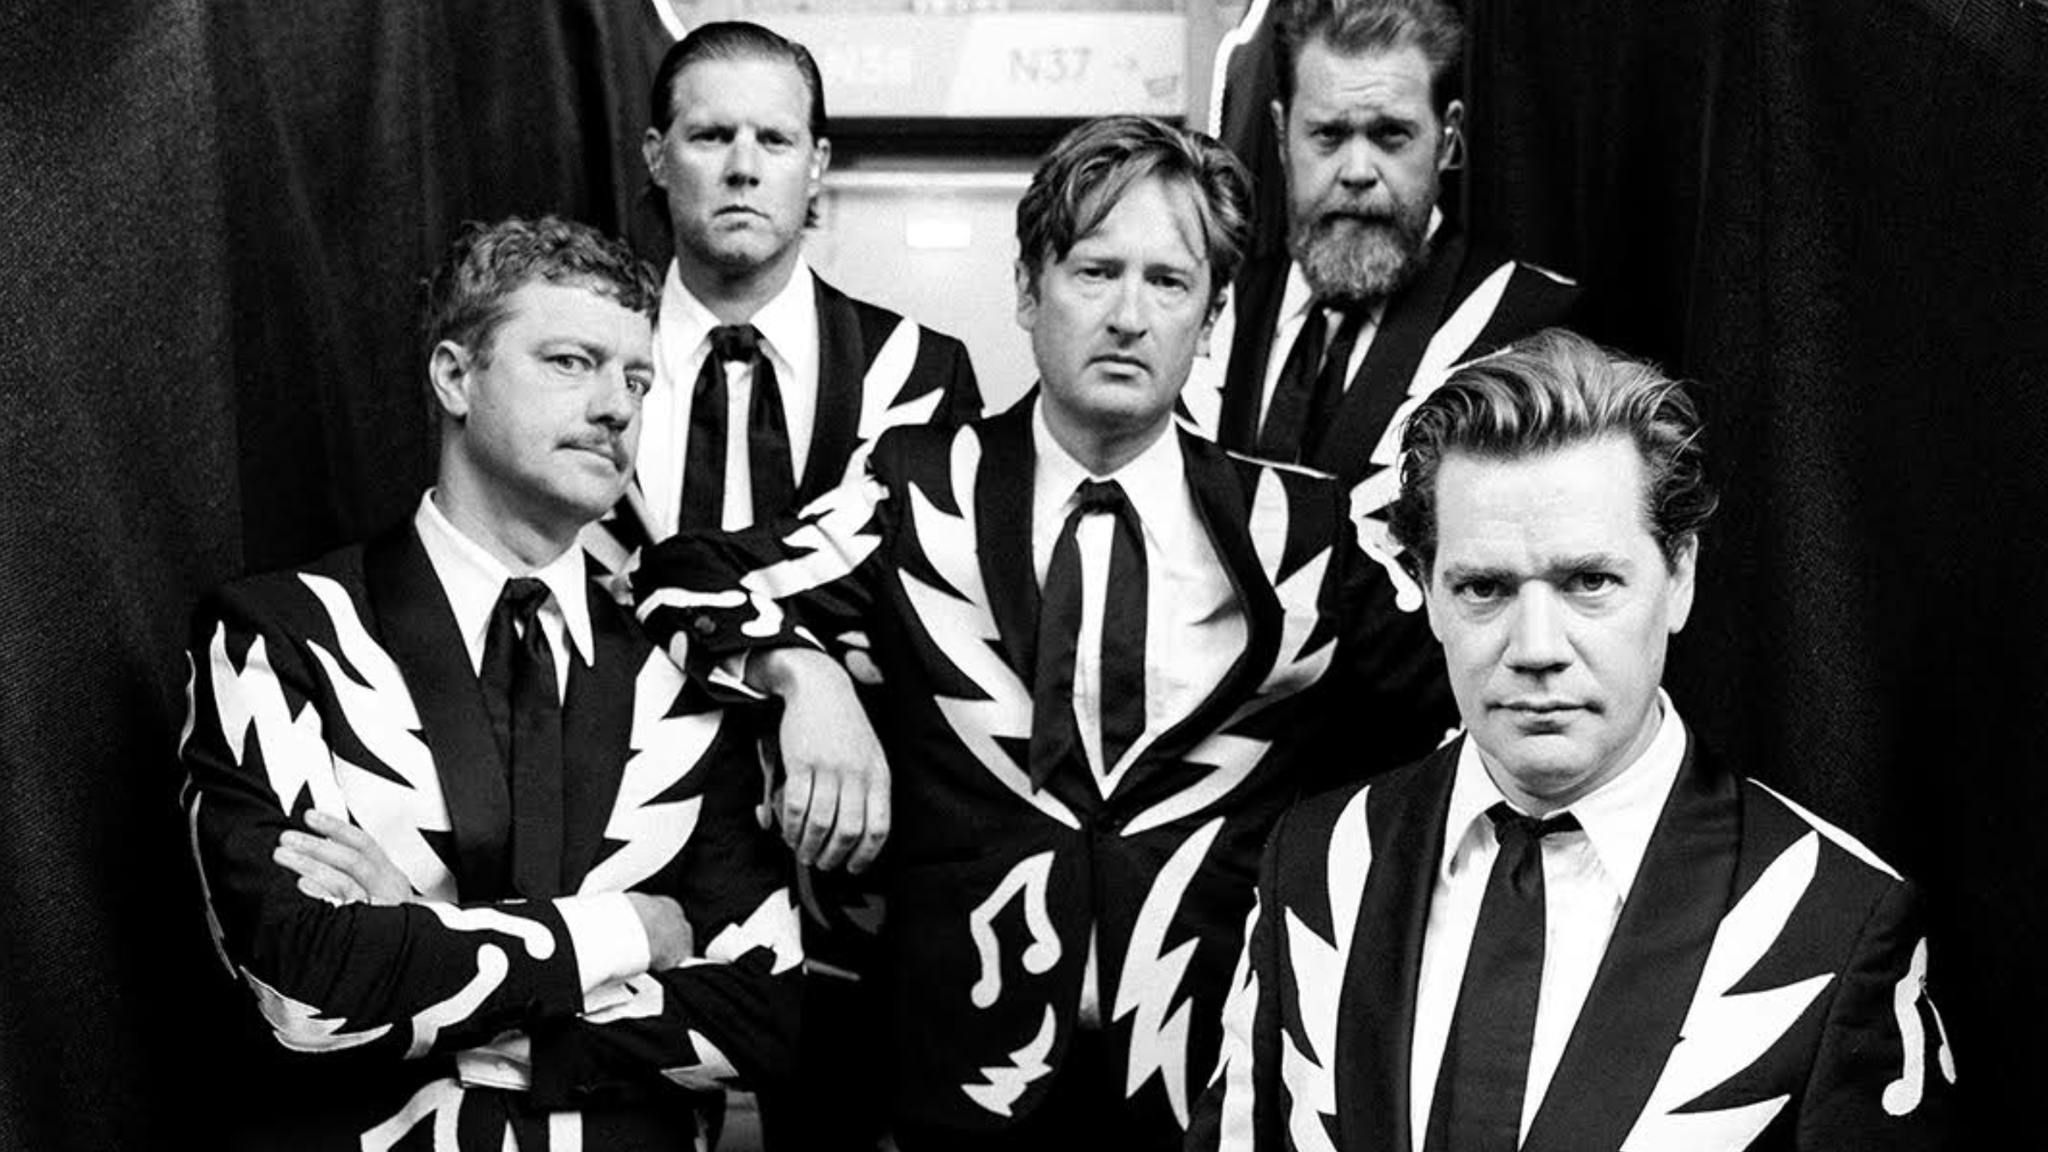 The Hives have just released two new singles